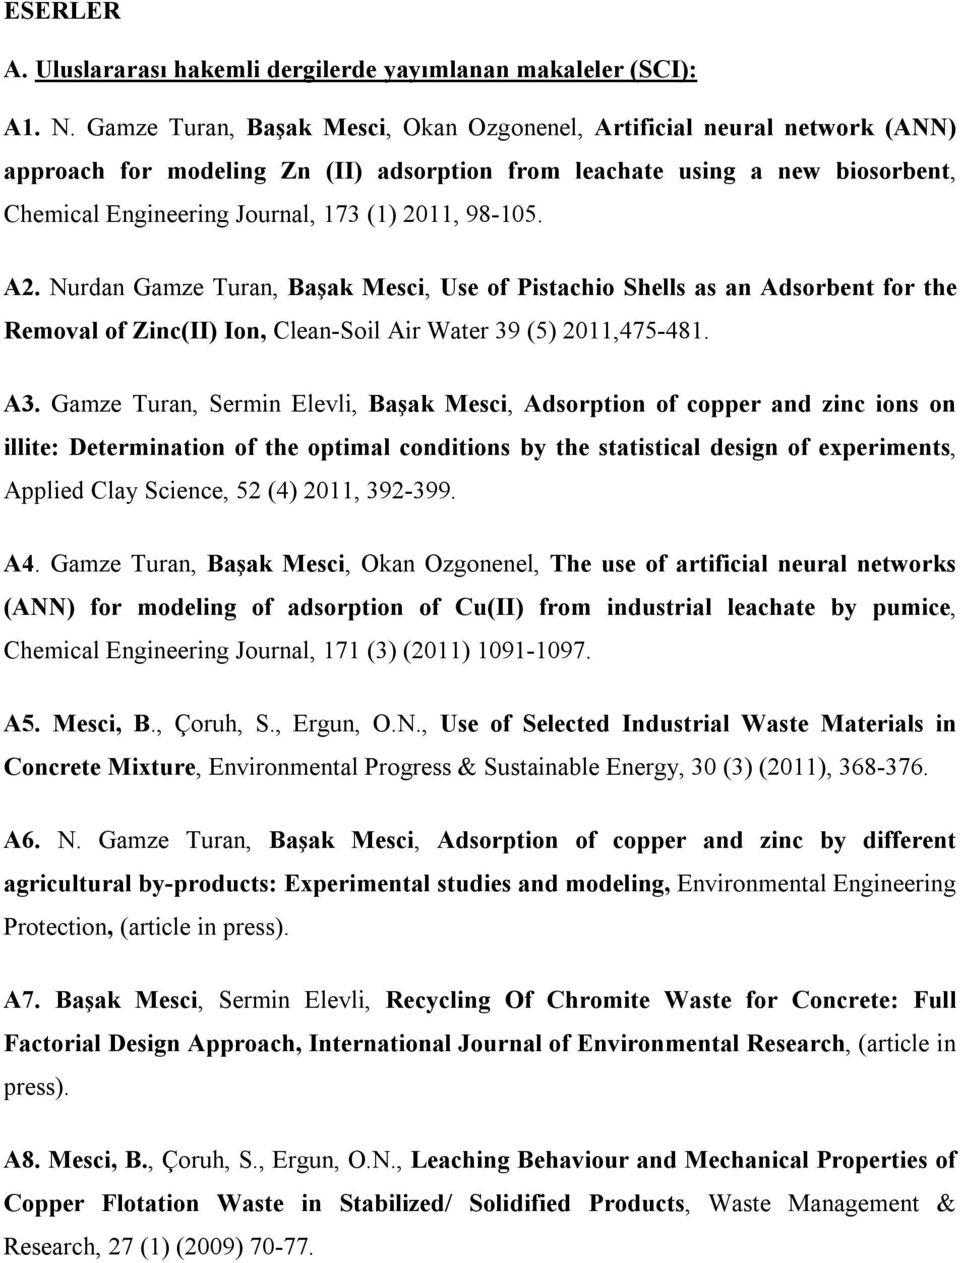 98-105. A2. Nurdan Gamze Turan, Başak Mesci, Use of Pistachio Shells as an Adsorbent for the Removal of Zinc(II) Ion, Clean-Soil Air Water 39 (5) 2011,475-481. A3.